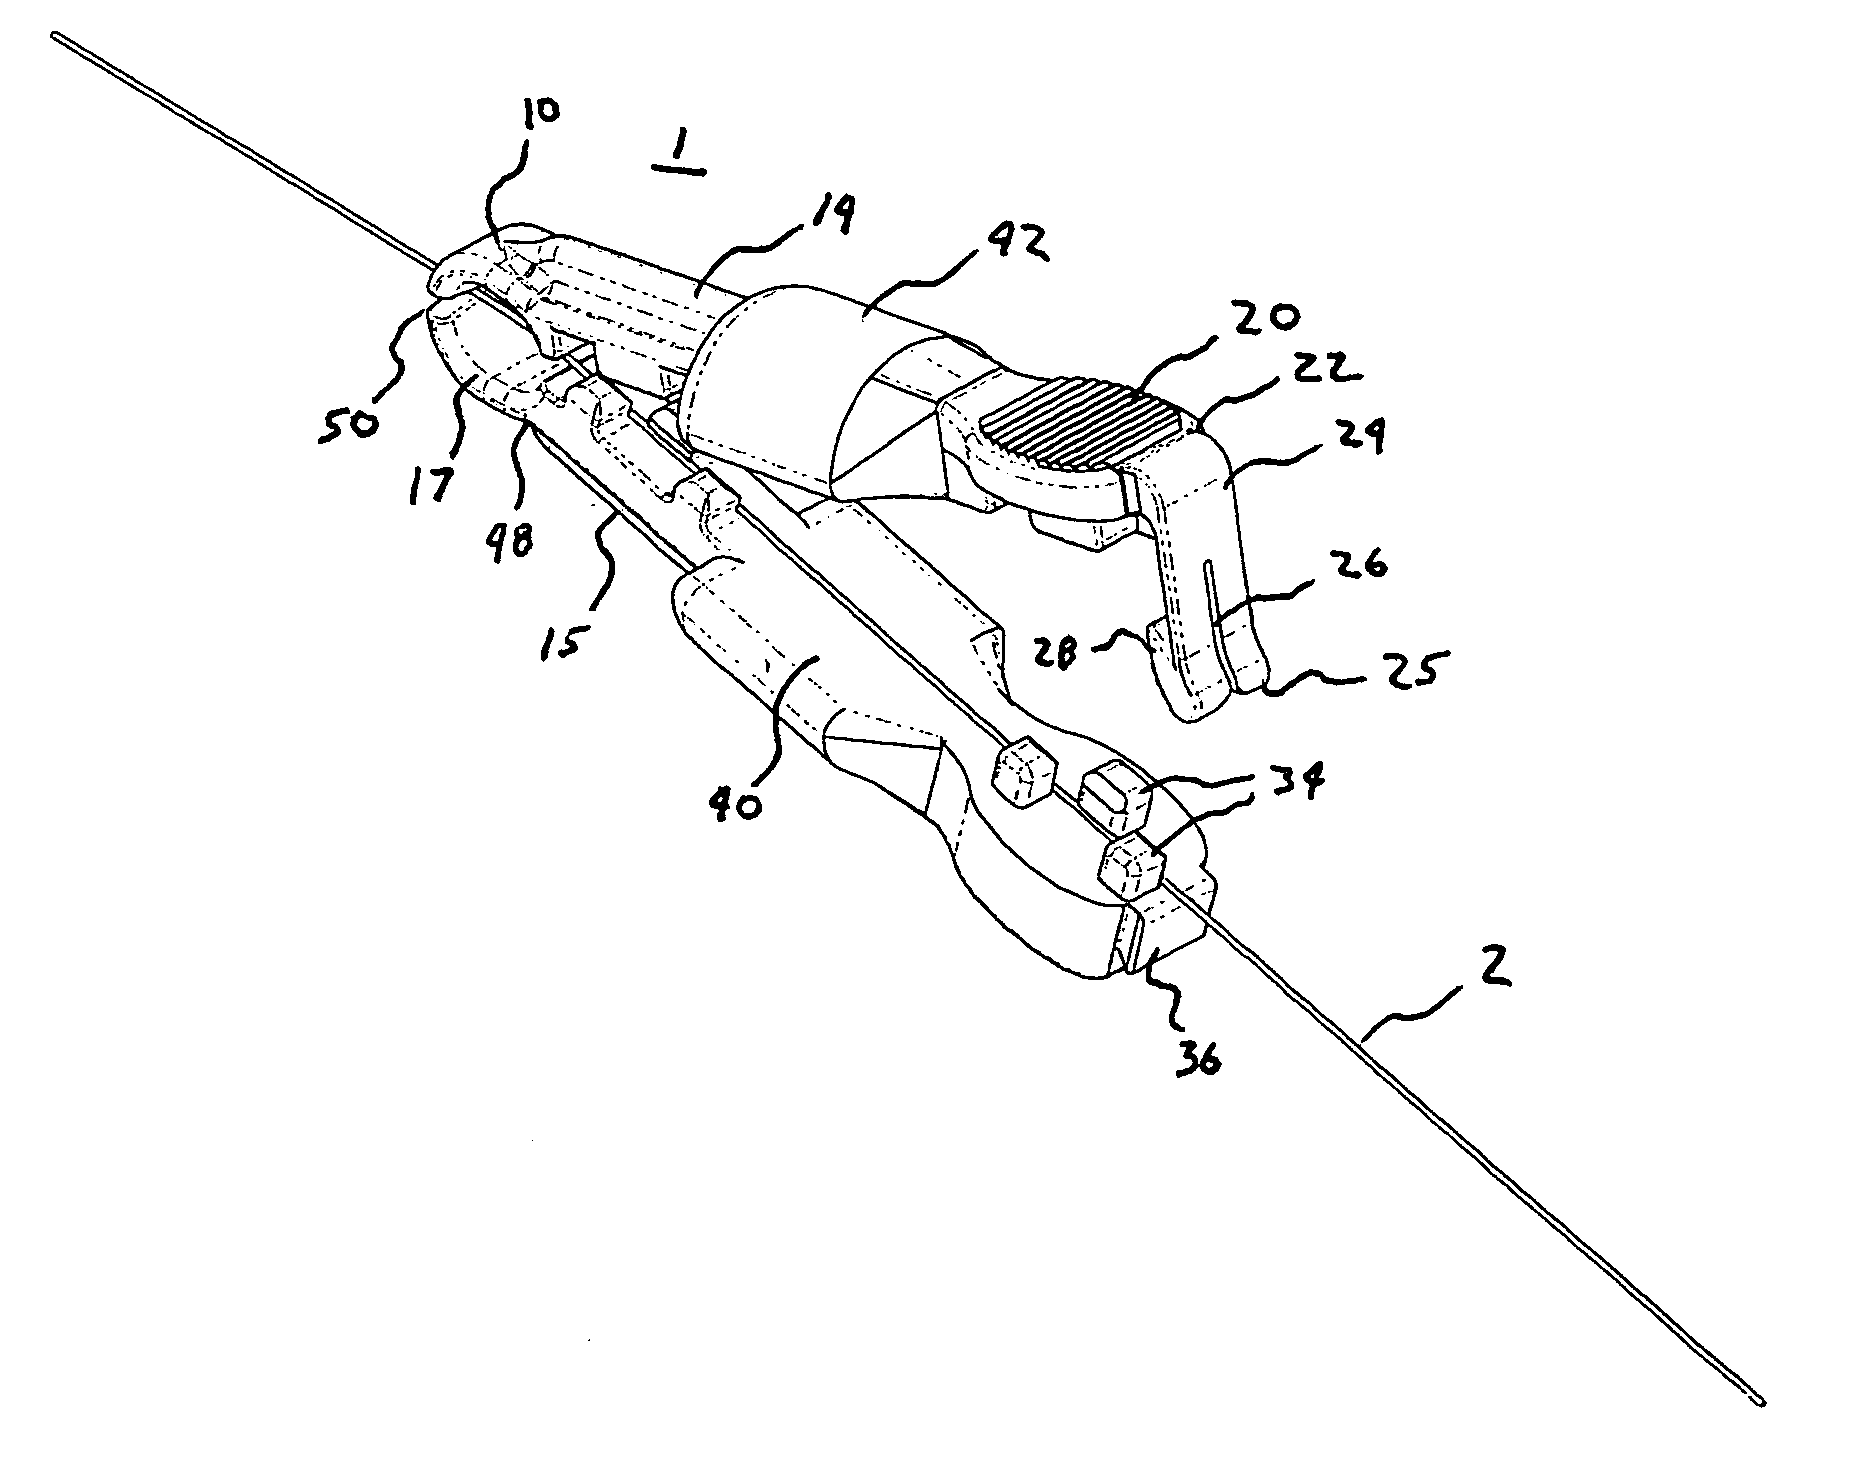 Quick-release torquer apparatus for delivering and maintaining a medical guidewire